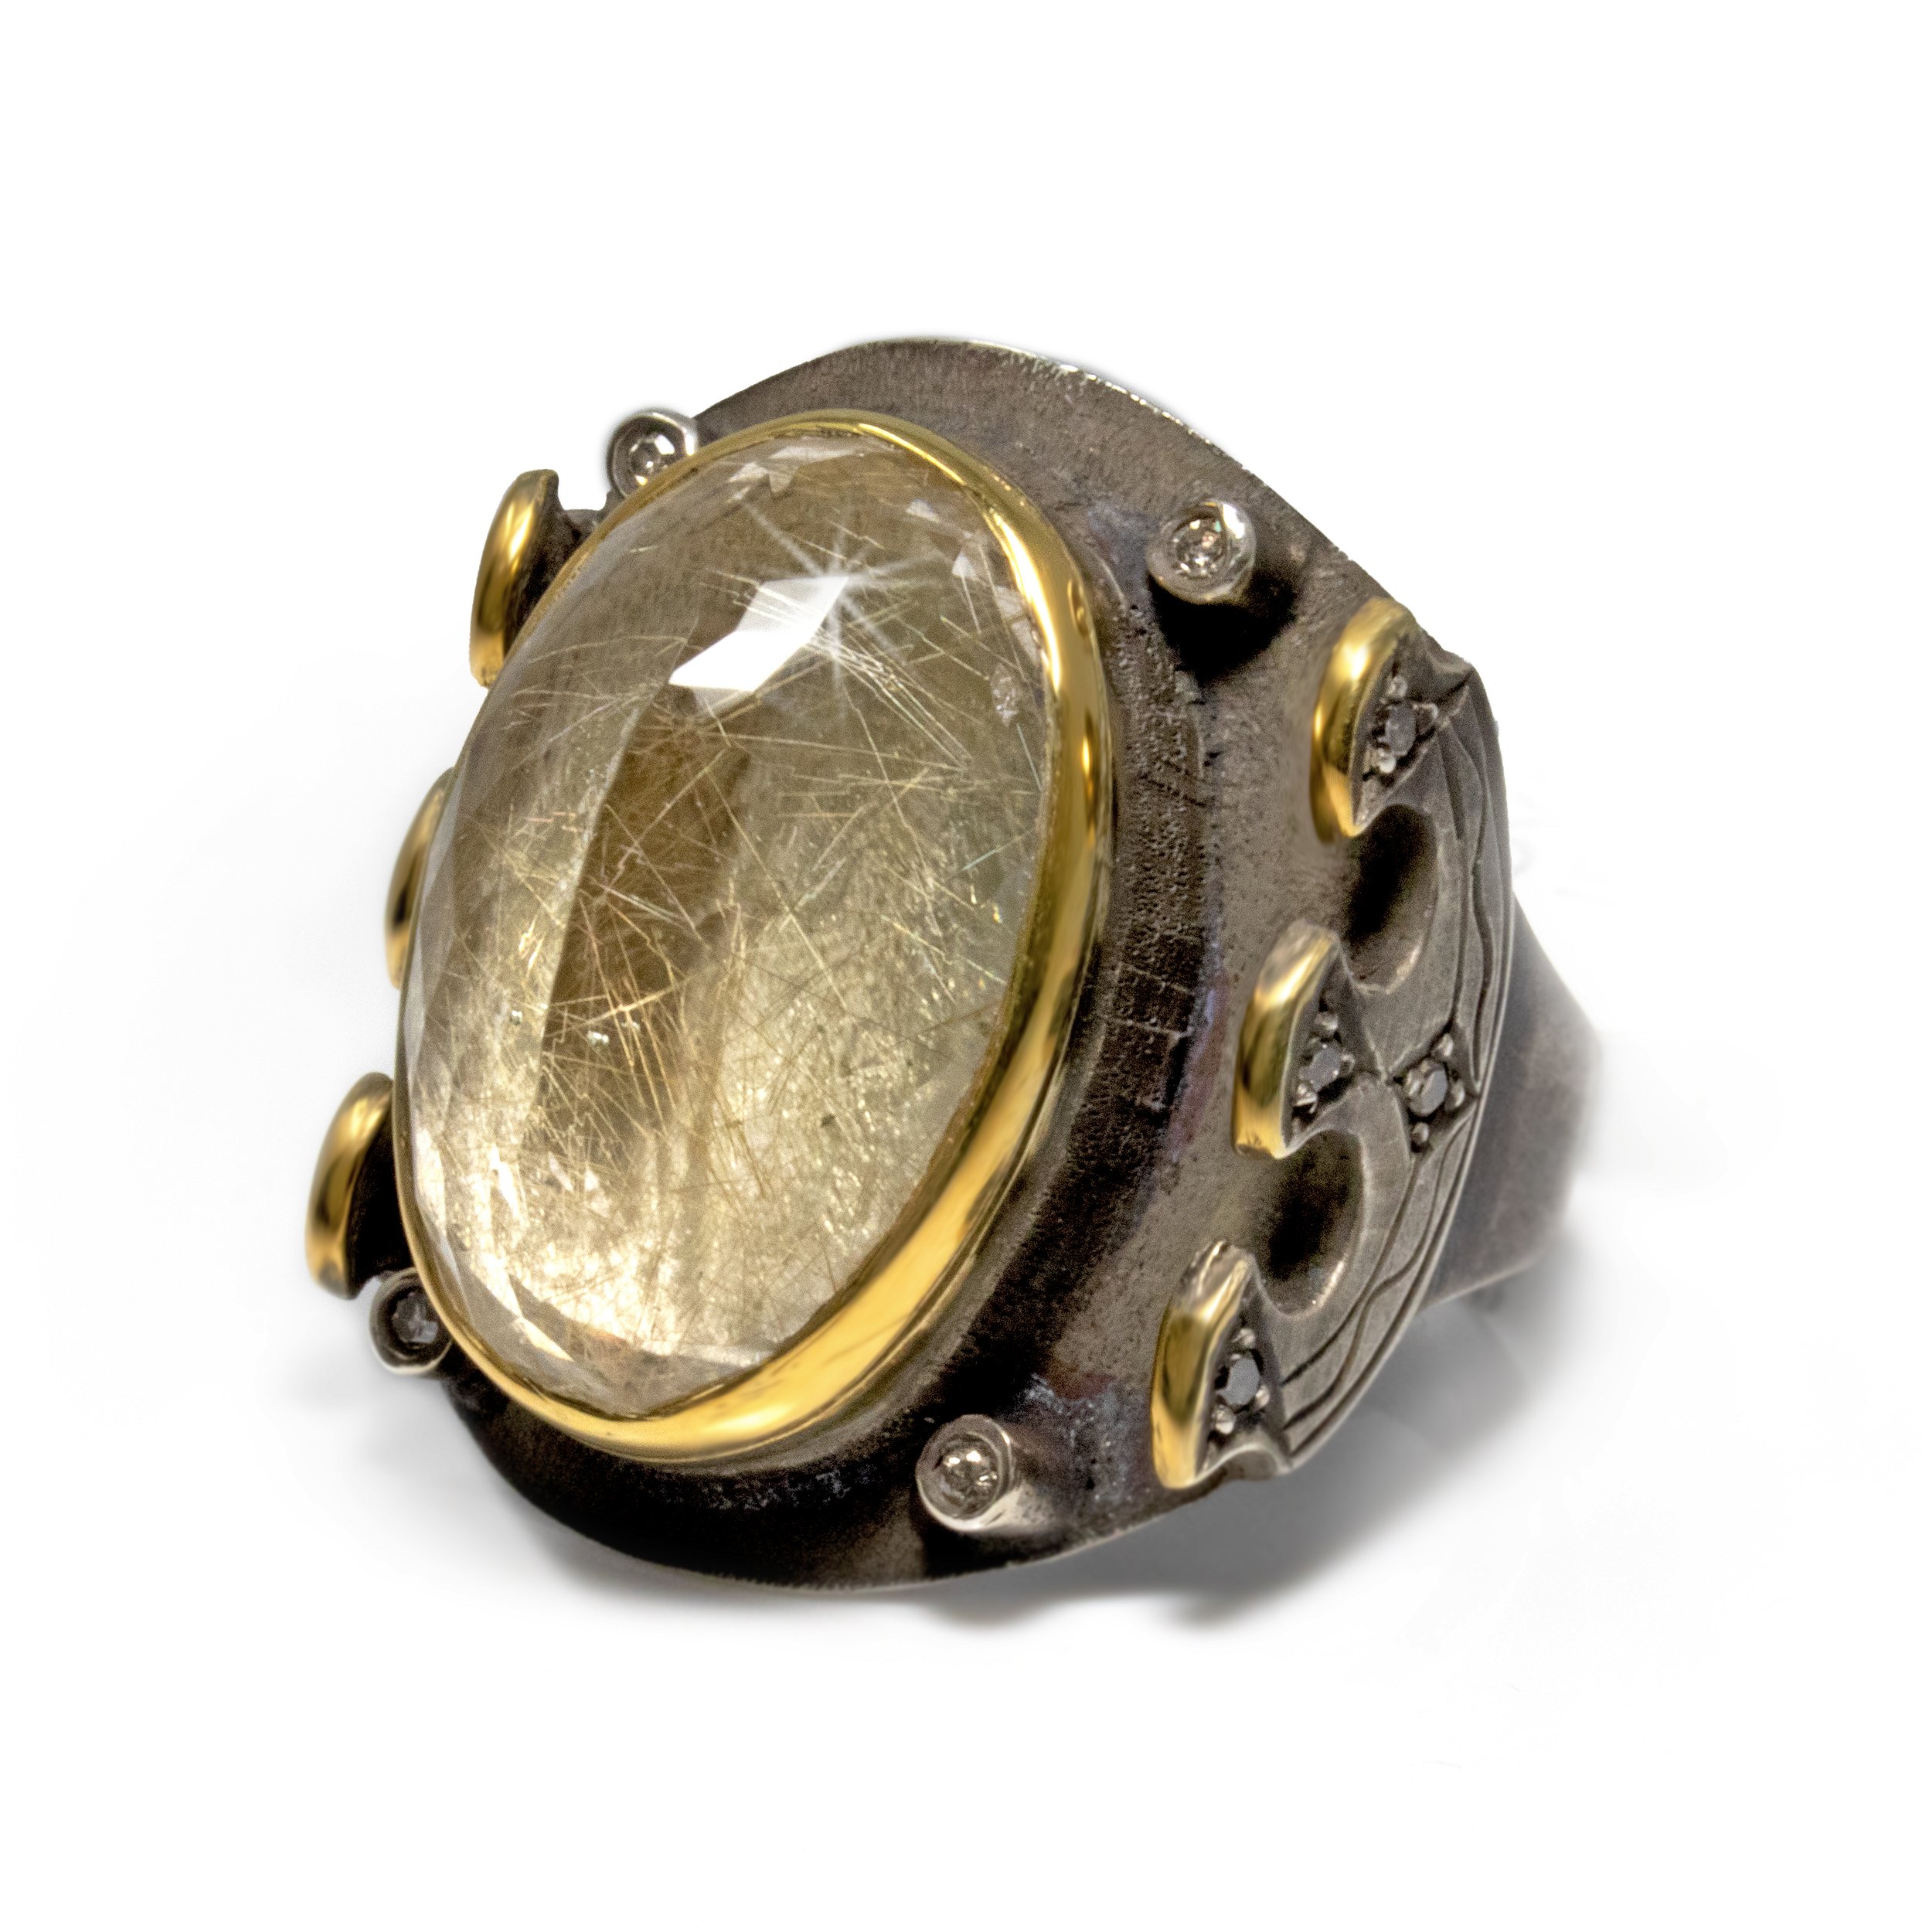 Golden Rutile Ring - Reverse Set Facet Oval On Oxidized Medieval Style Band With Diamonds & Gold Vermeil Accents Size 9.5